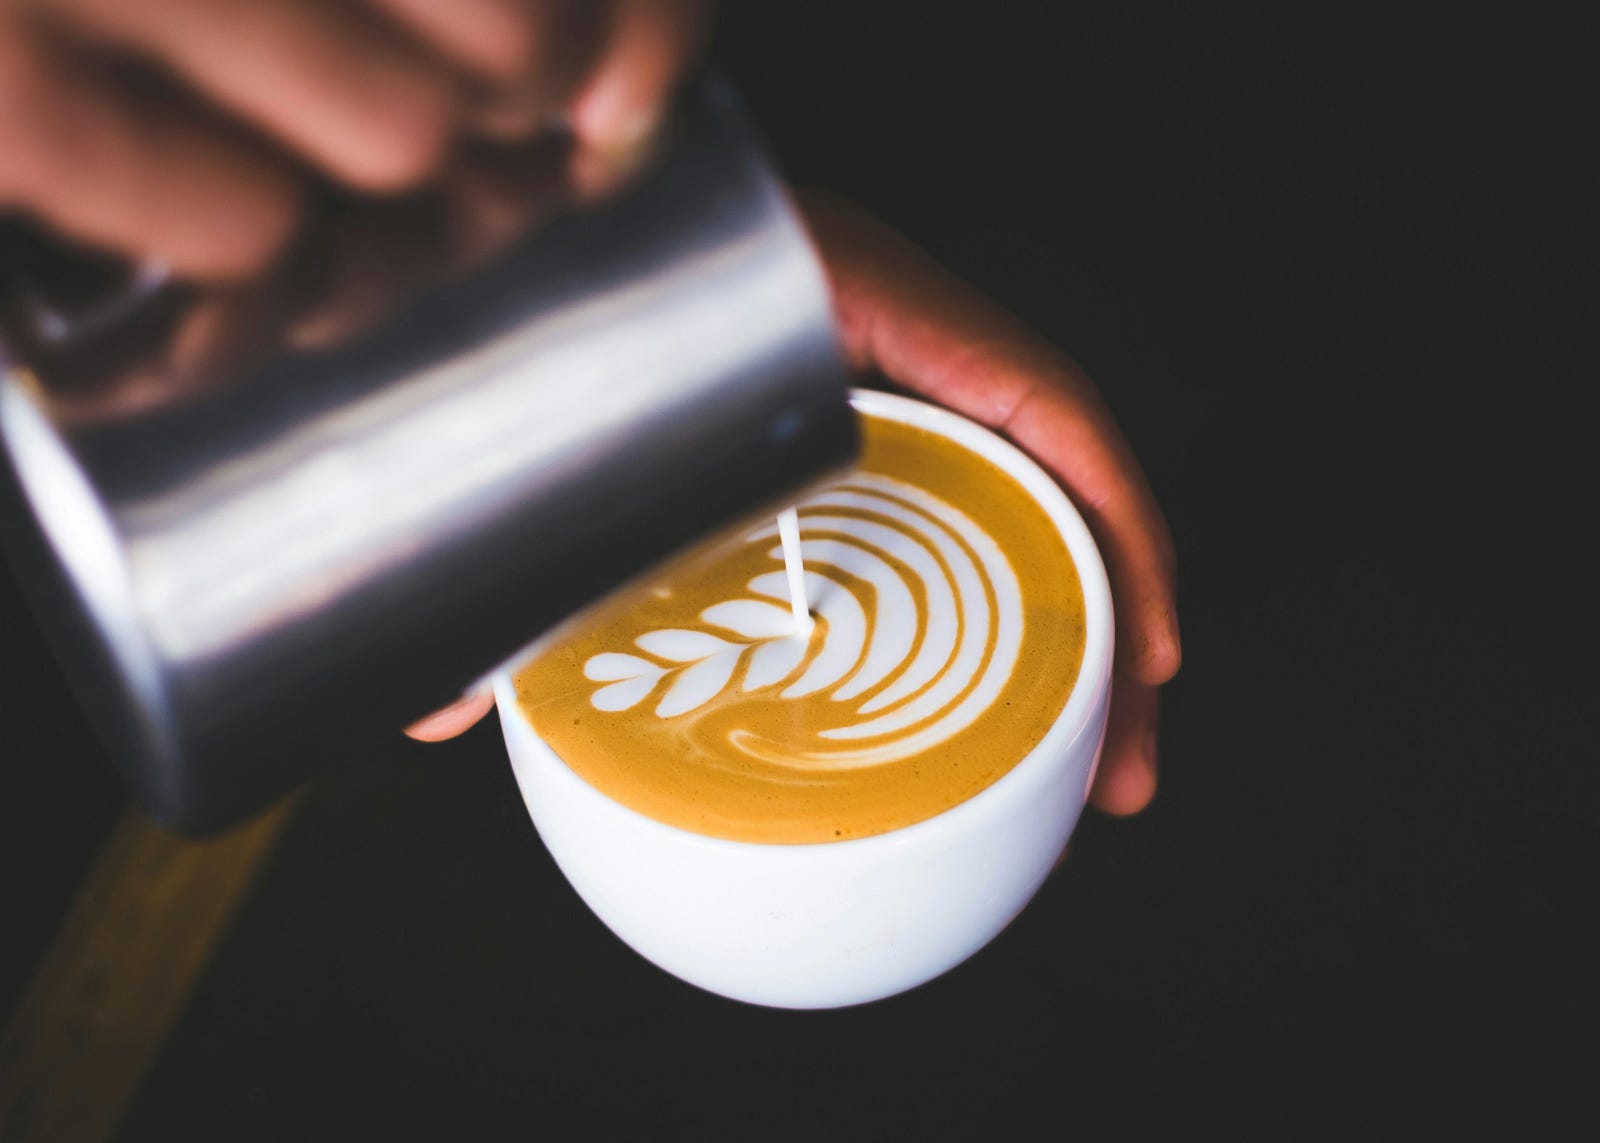 A person pours milk to create a beautiful design for a caffe latte.